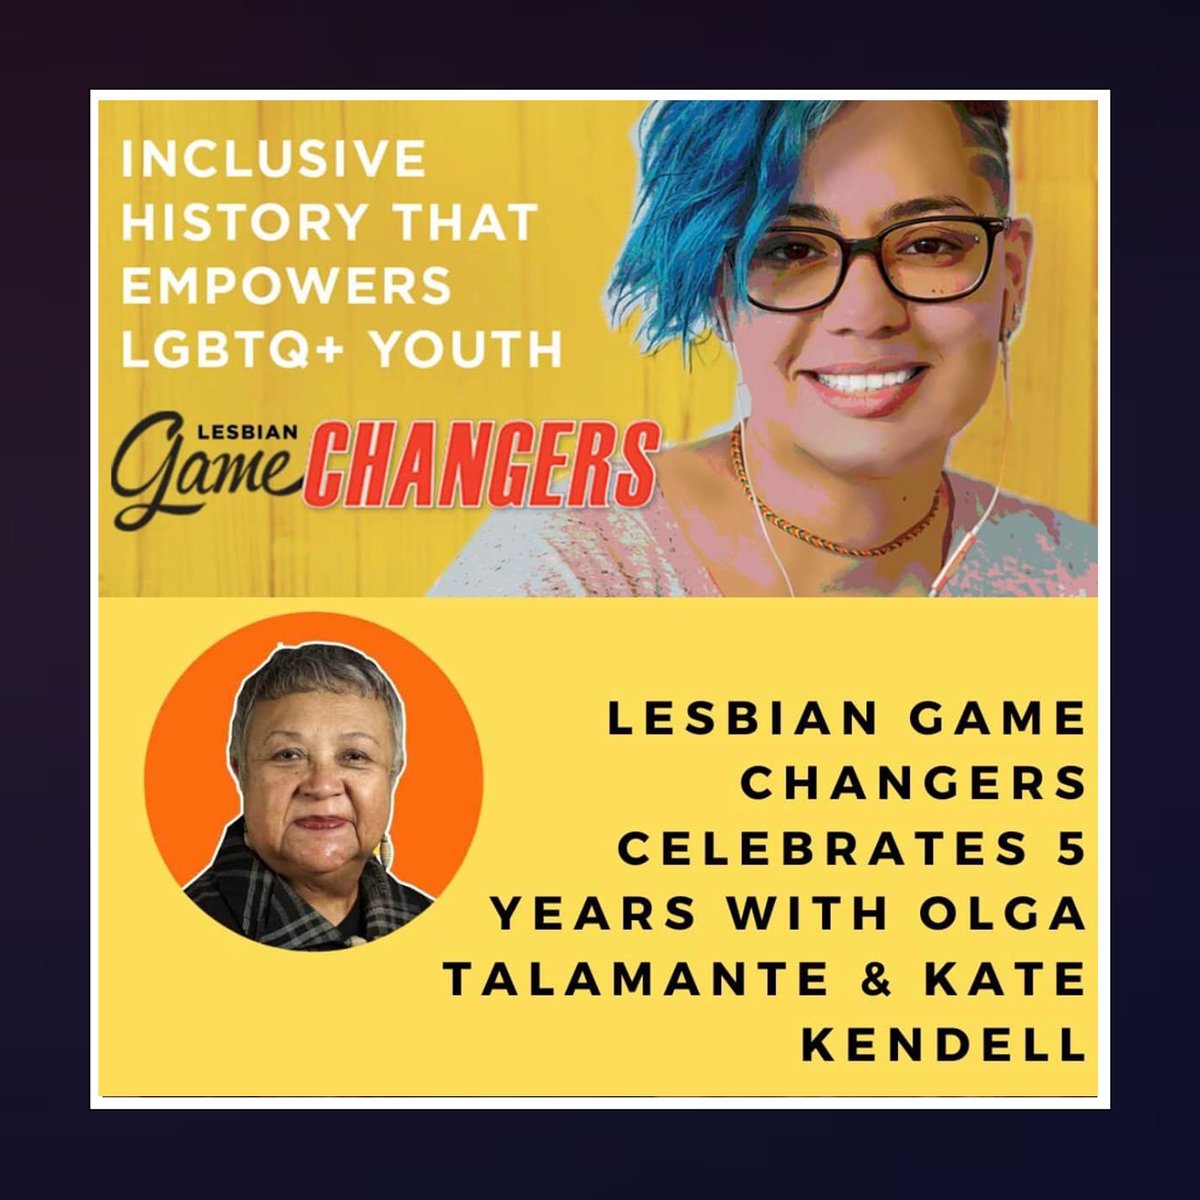 Lesbian Game Changers celebrates FIVE YEARS this Friday! You're invited to celebrate at Manny's with founder @RJLowey. The evening will feature the premiere of two doc shorts and a panel discussion w/ the subjects Olga Talamante & @KateKendell. Tix: 👉 bit.ly/48OttVb